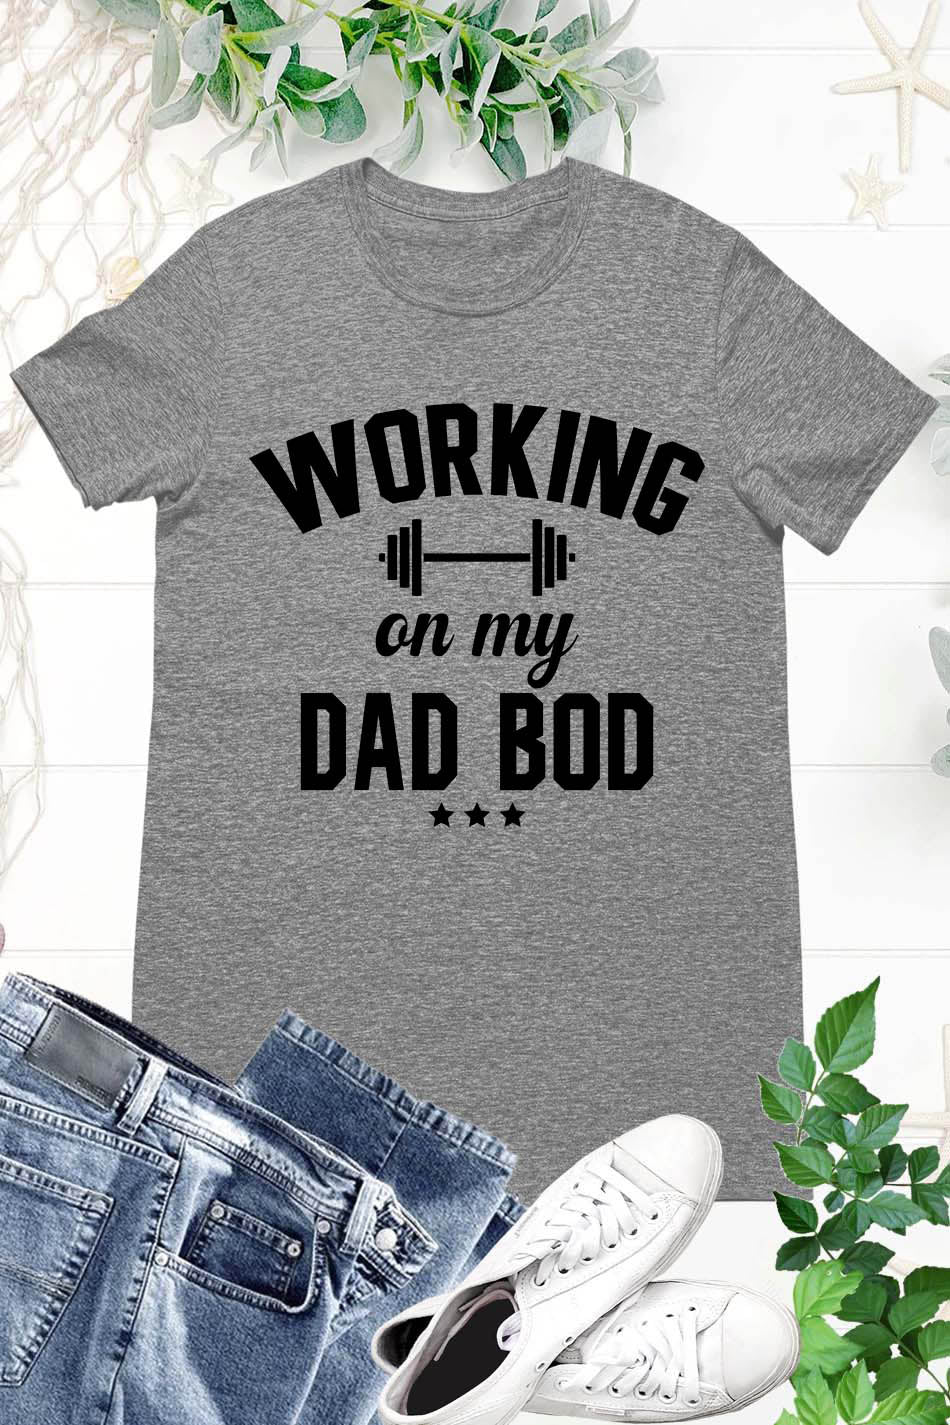 Working On My Dad Bod - Funny Gym Workout Pregnancy Essential T-Shirt